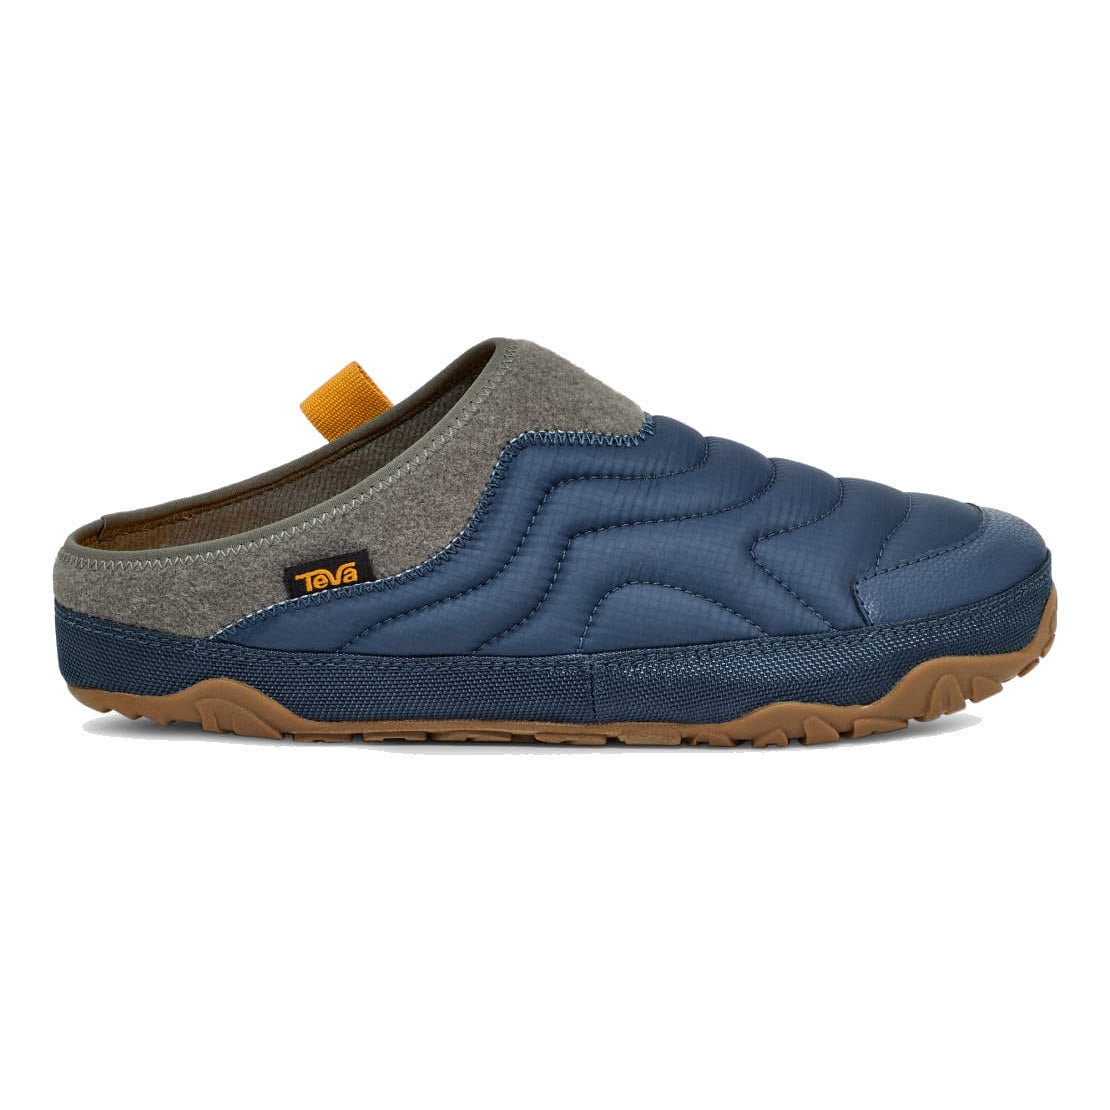 A single blue and gray Teva ReEmber Terrain slip-on shoe with a prominent sole and a pull tab on the heel.